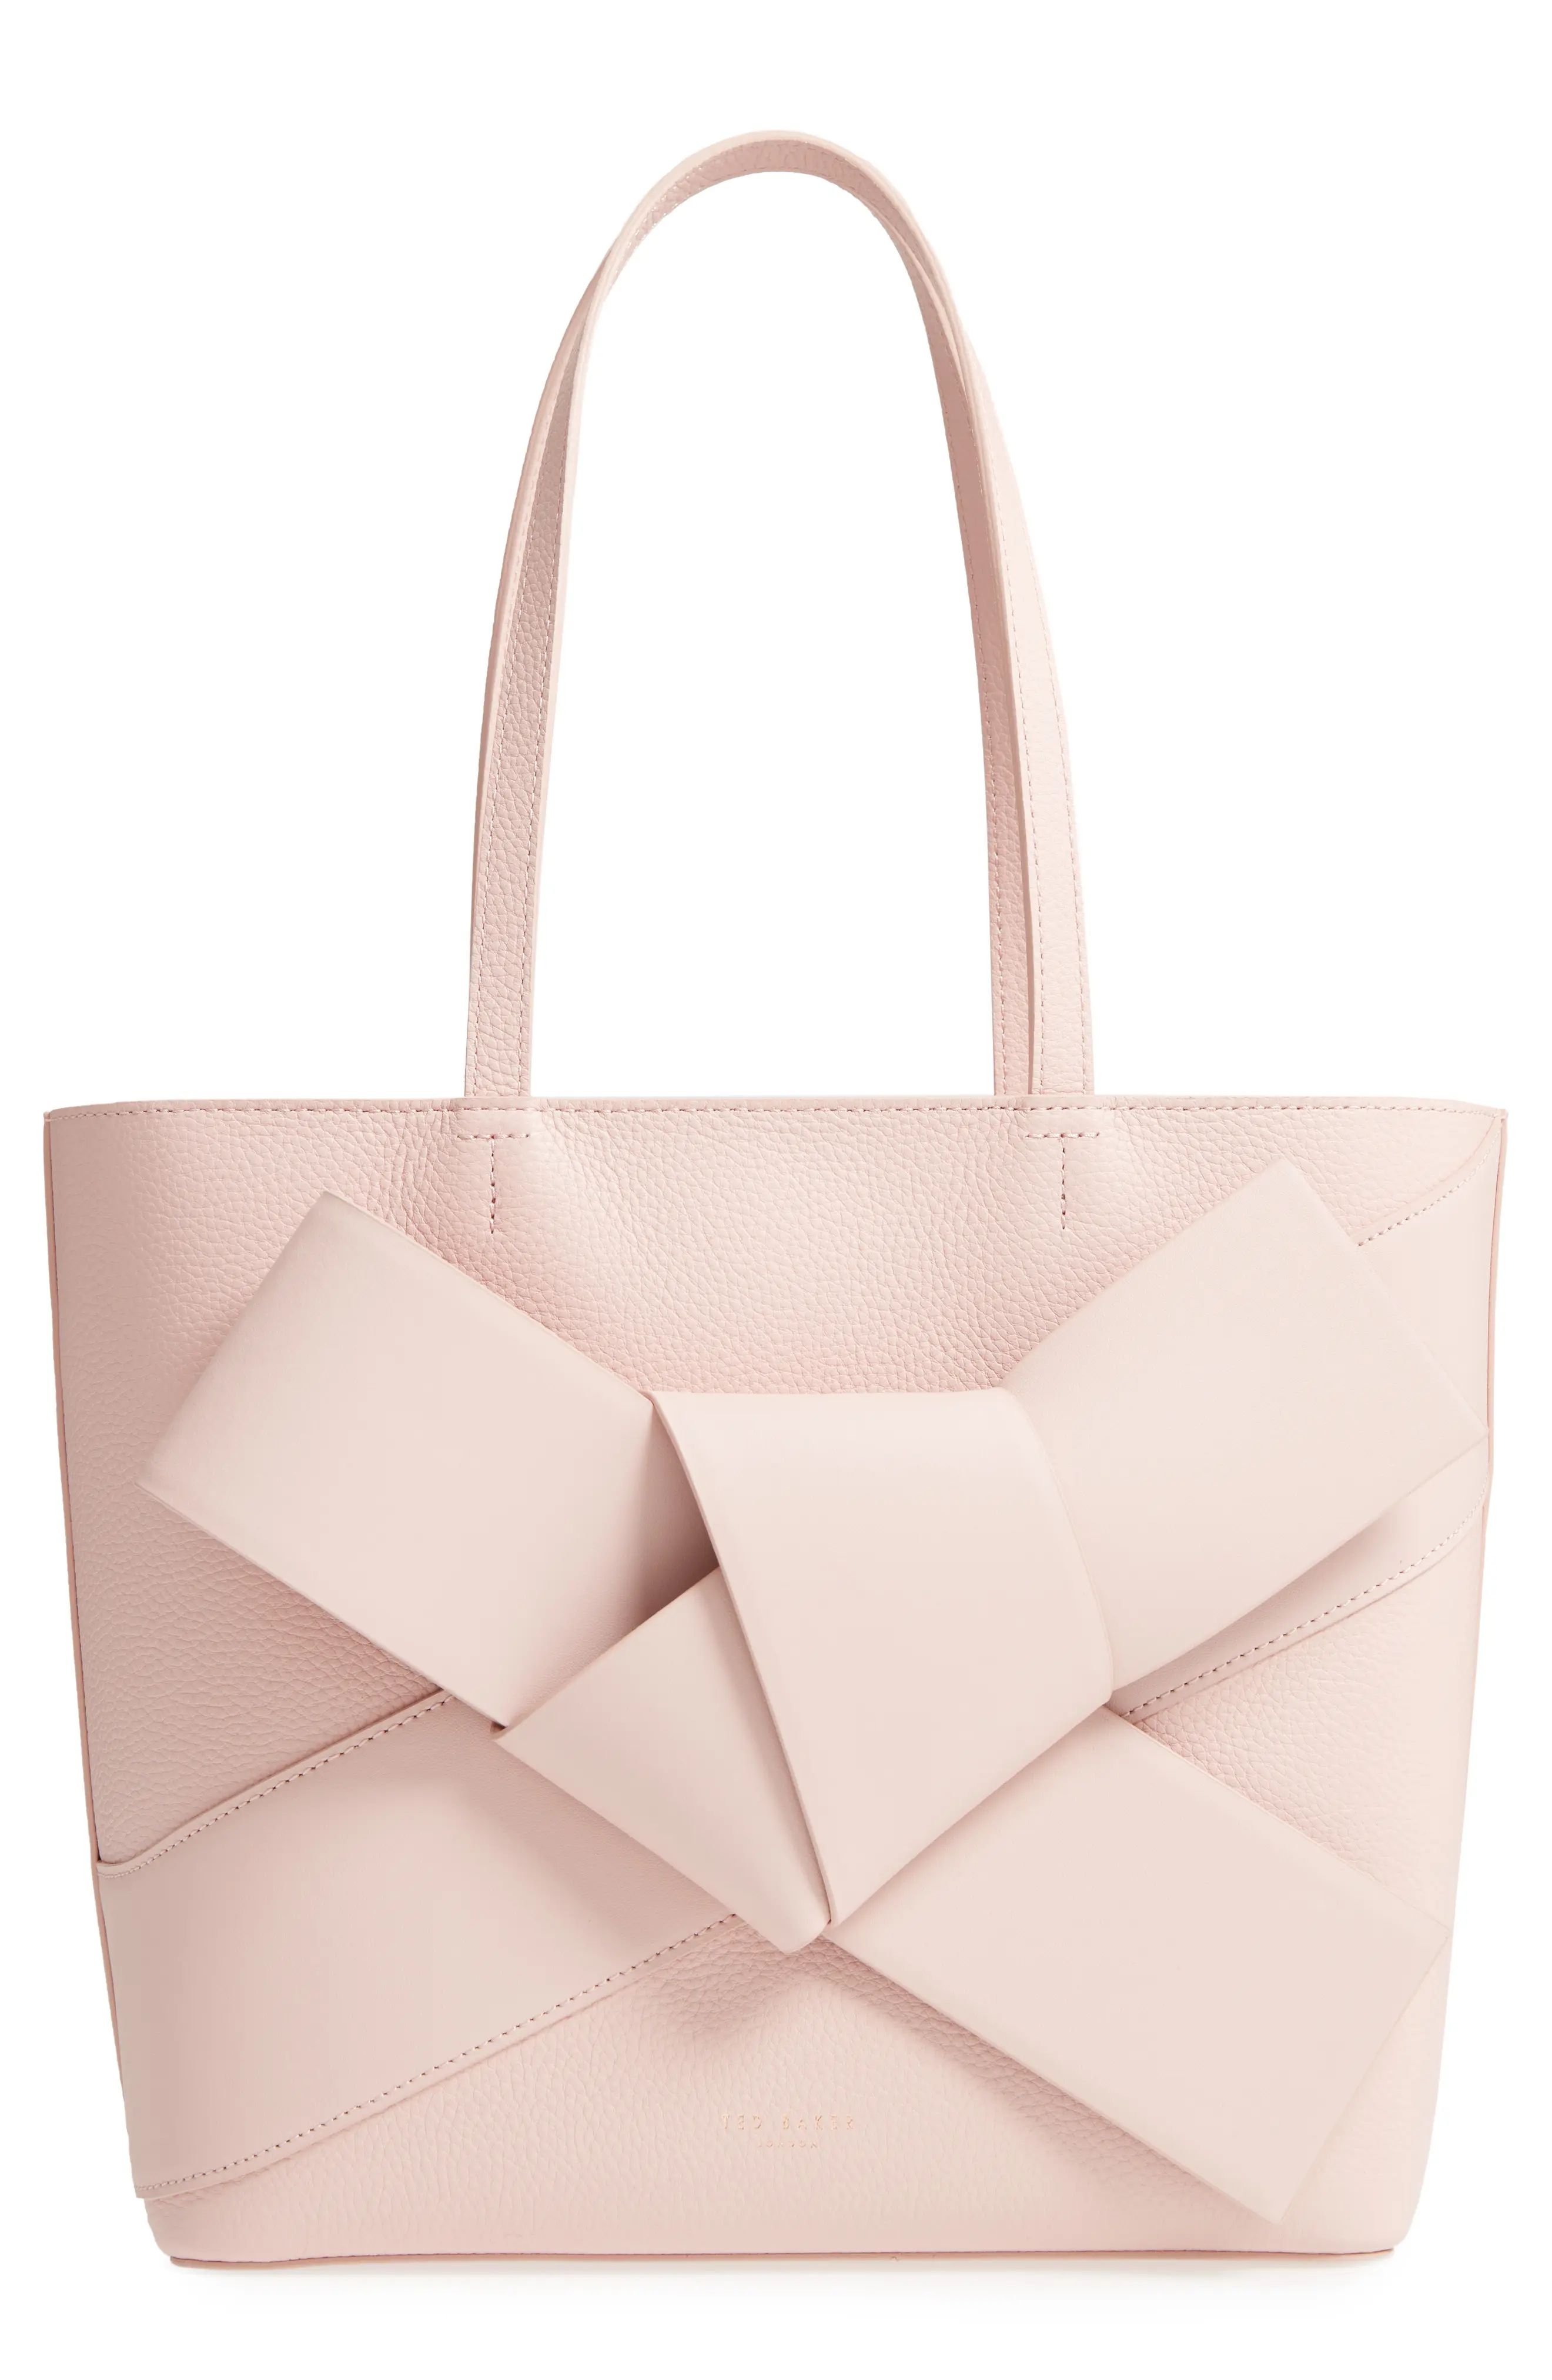 Ted Baker London Giant Knot Leather Shopper - Pink | Nordstrom